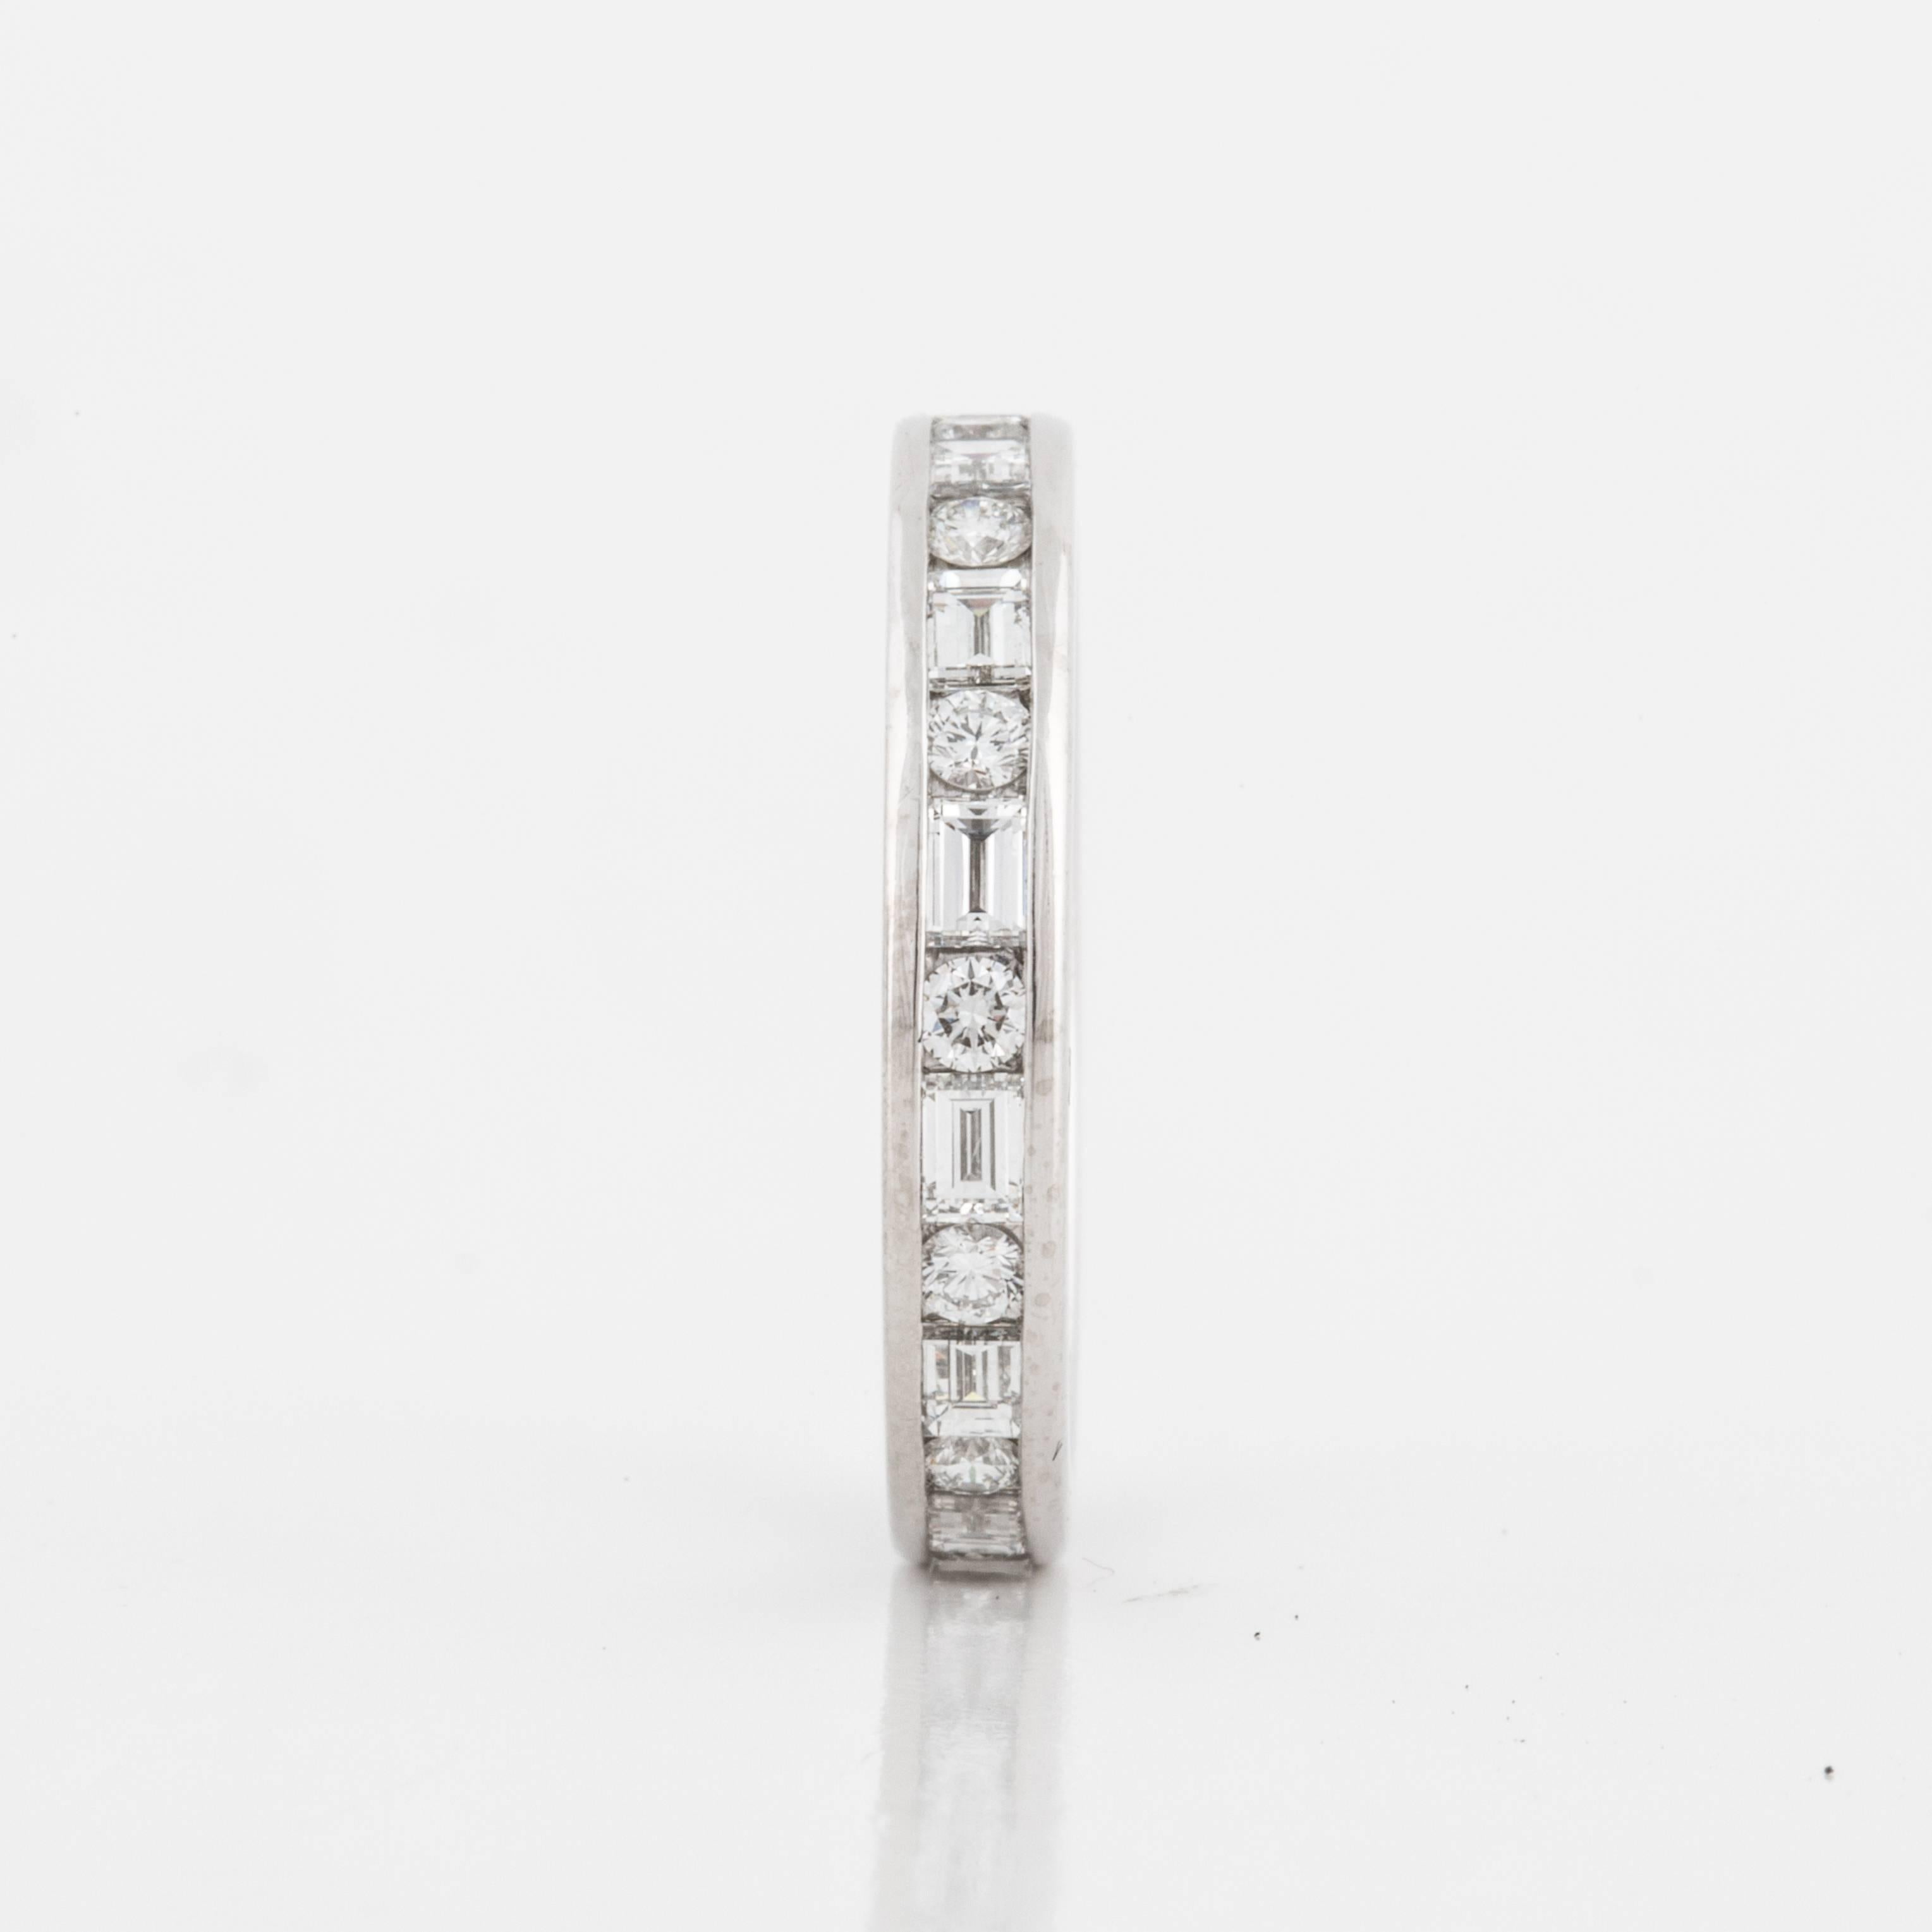 Tiffany & Co. platinum diamond eternity band featuring channel-set alternating round and baguette diamonds.  There are thirteen round brilliant-cut diamonds weighing 0.65 carats and thirteen baguette diamonds weighing 1.05 carats.  All diamonds are